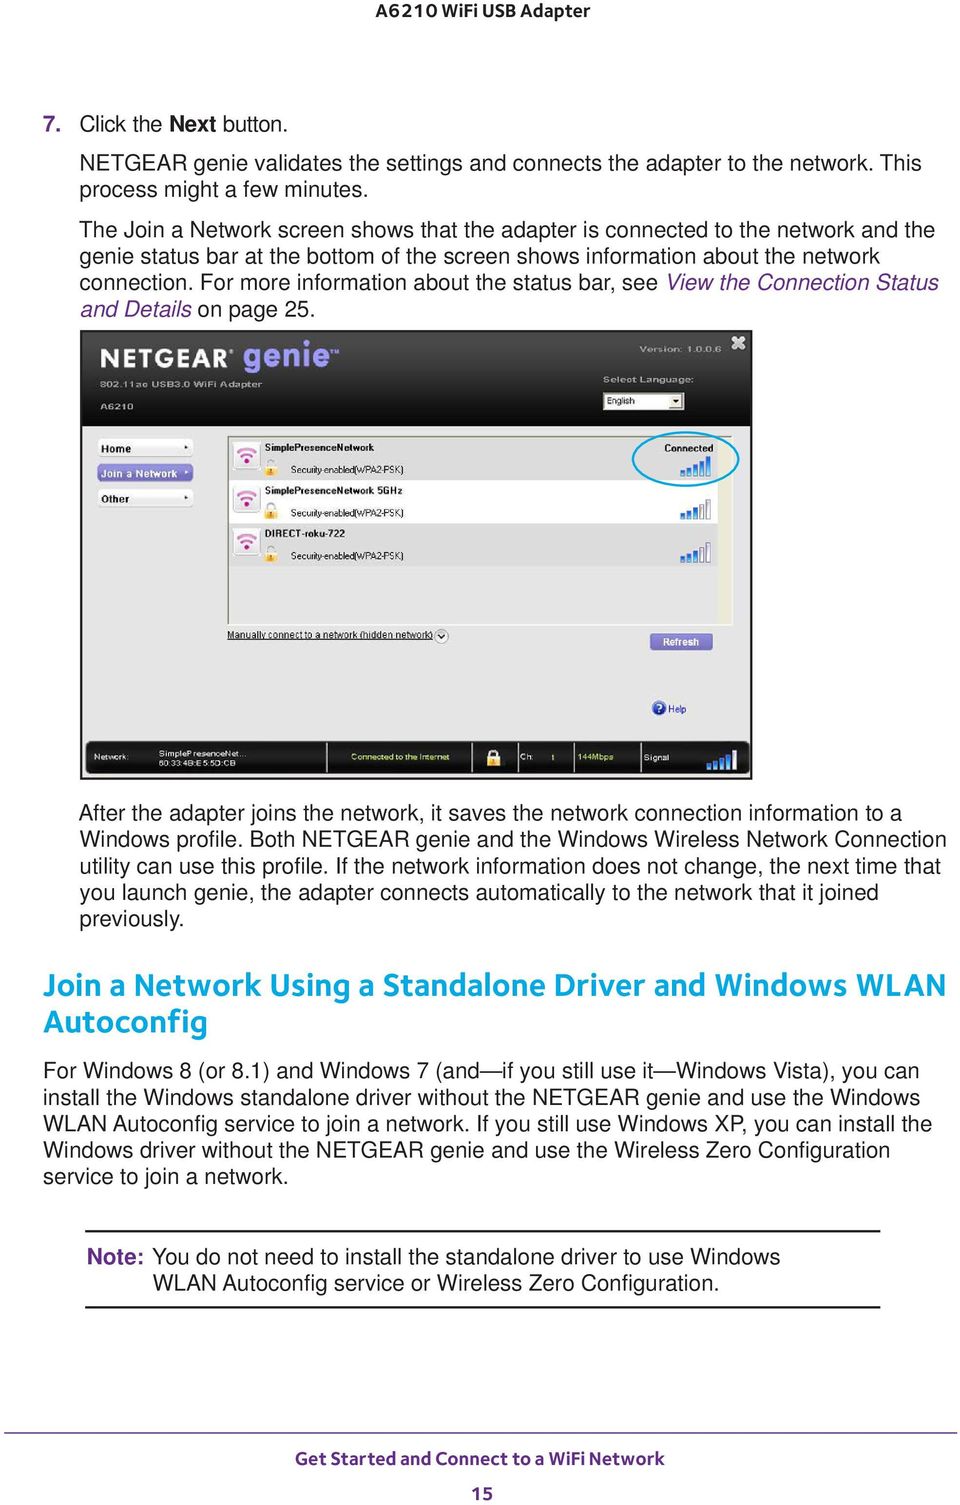 For more information about the status bar, see View the Connection Status and Details on page 25. After the adapter joins the network, it saves the network connection information to a Windows profile.